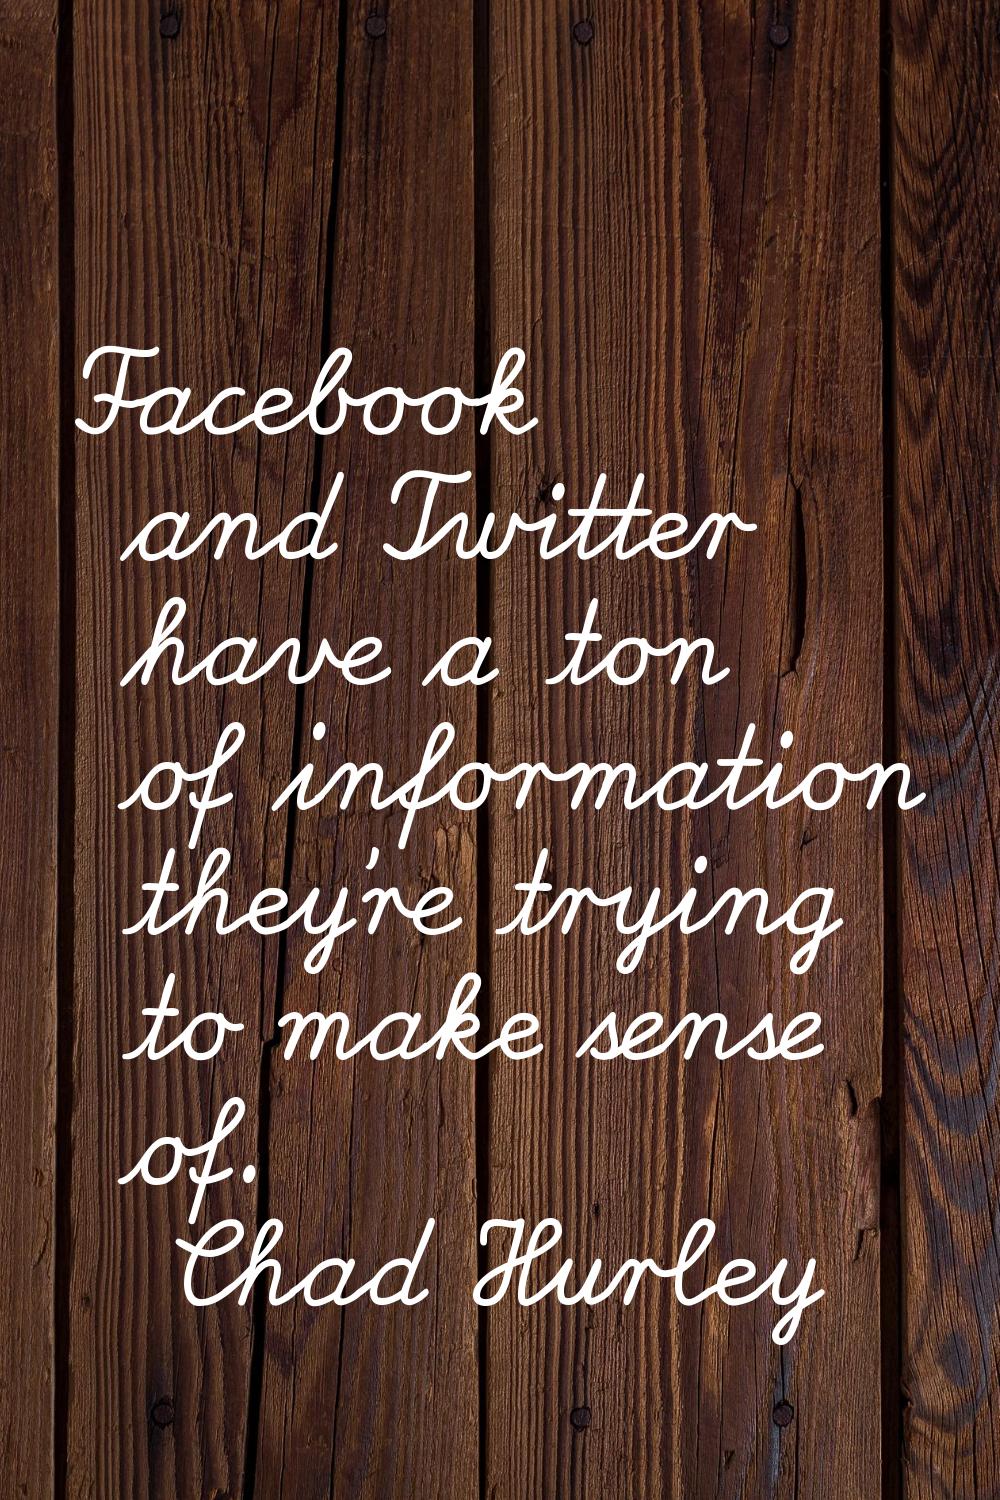 Facebook and Twitter have a ton of information they're trying to make sense of.